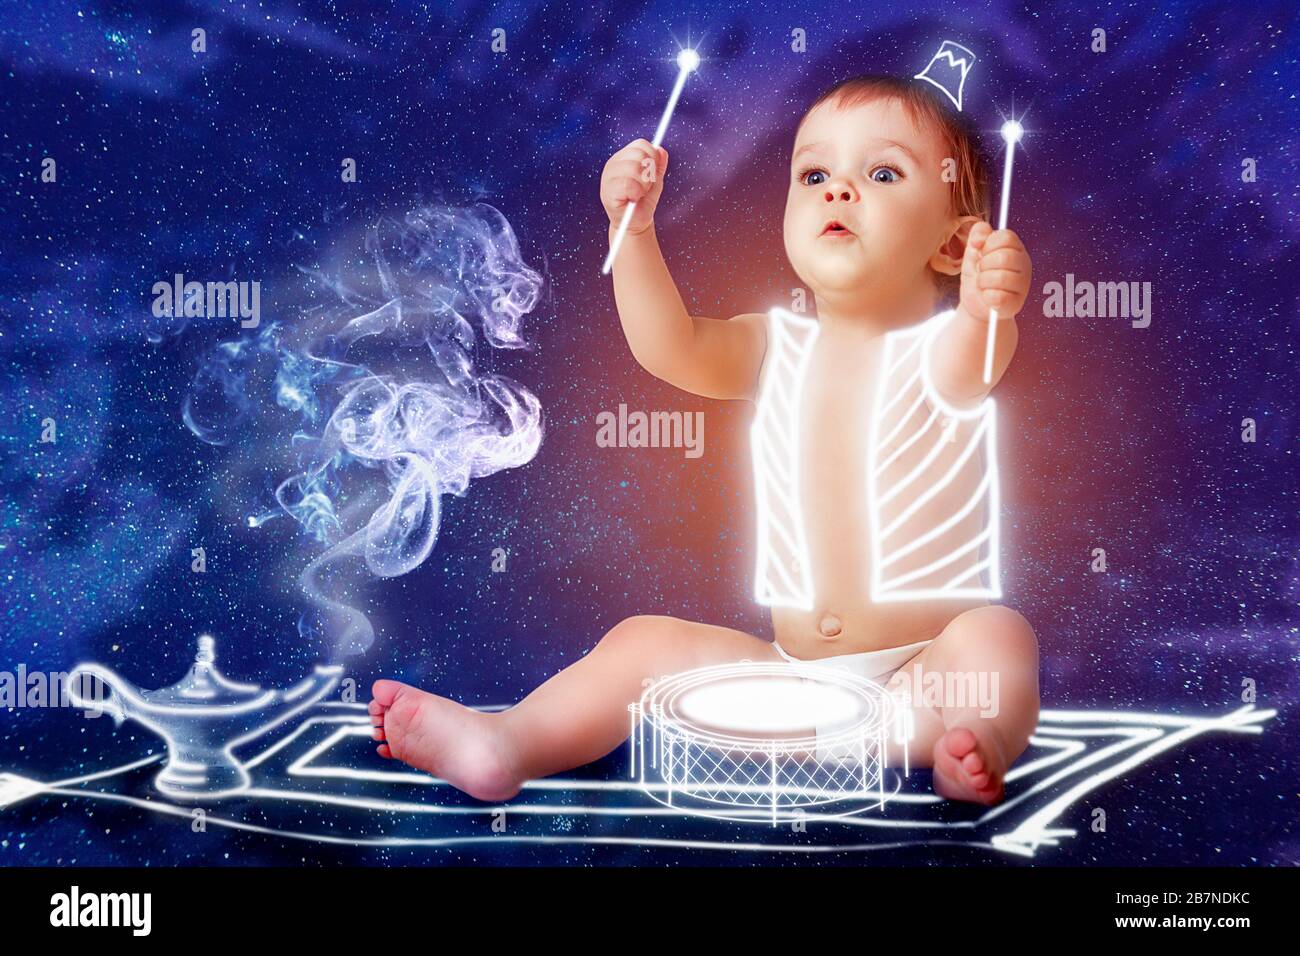 Funny little toddler wizard plays the drums while sitting on an imaginary carpet airplane with a magic lamp flying in the middle of the night sky. Dre Stock Photo